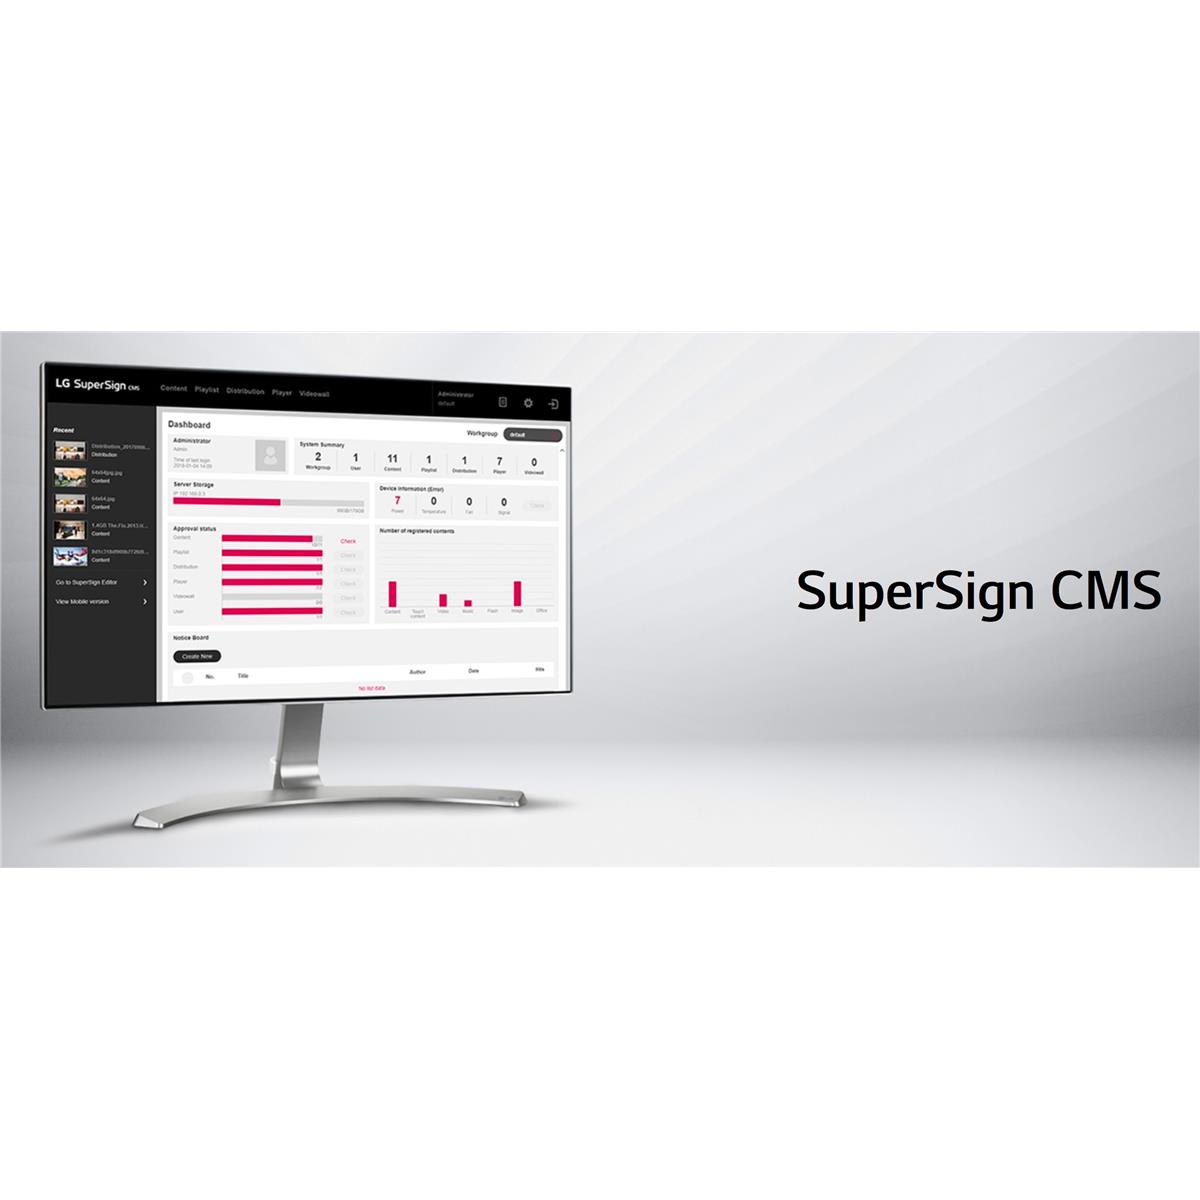 Image of LG SuperSign CMS 5-Year Solution Renewal